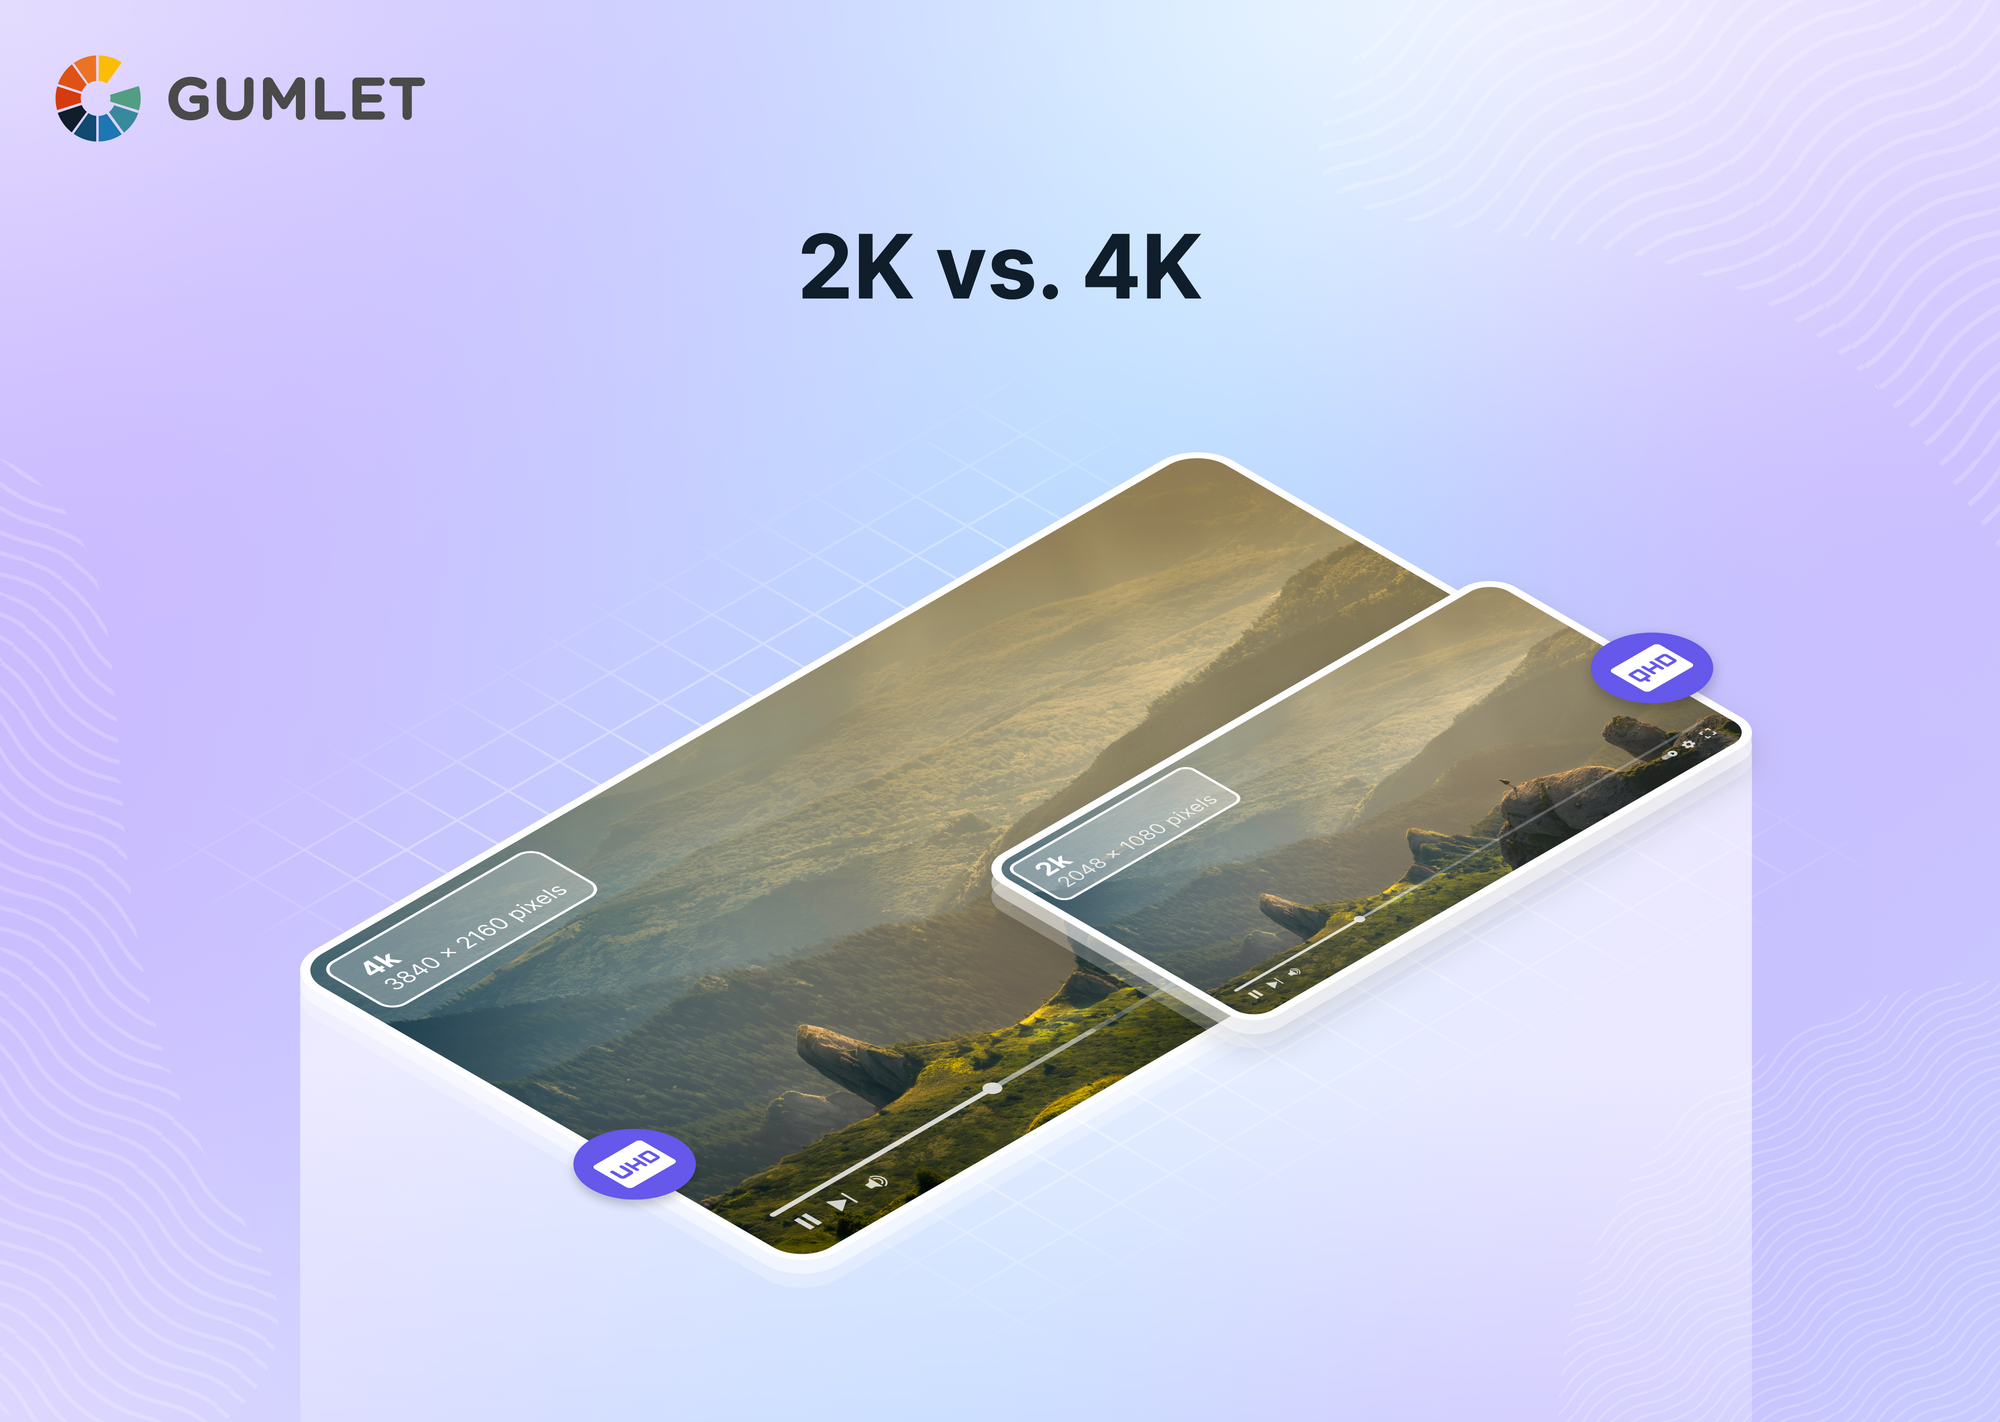 4K vs. 1080p: What's the Difference Between 4K and 1080p?